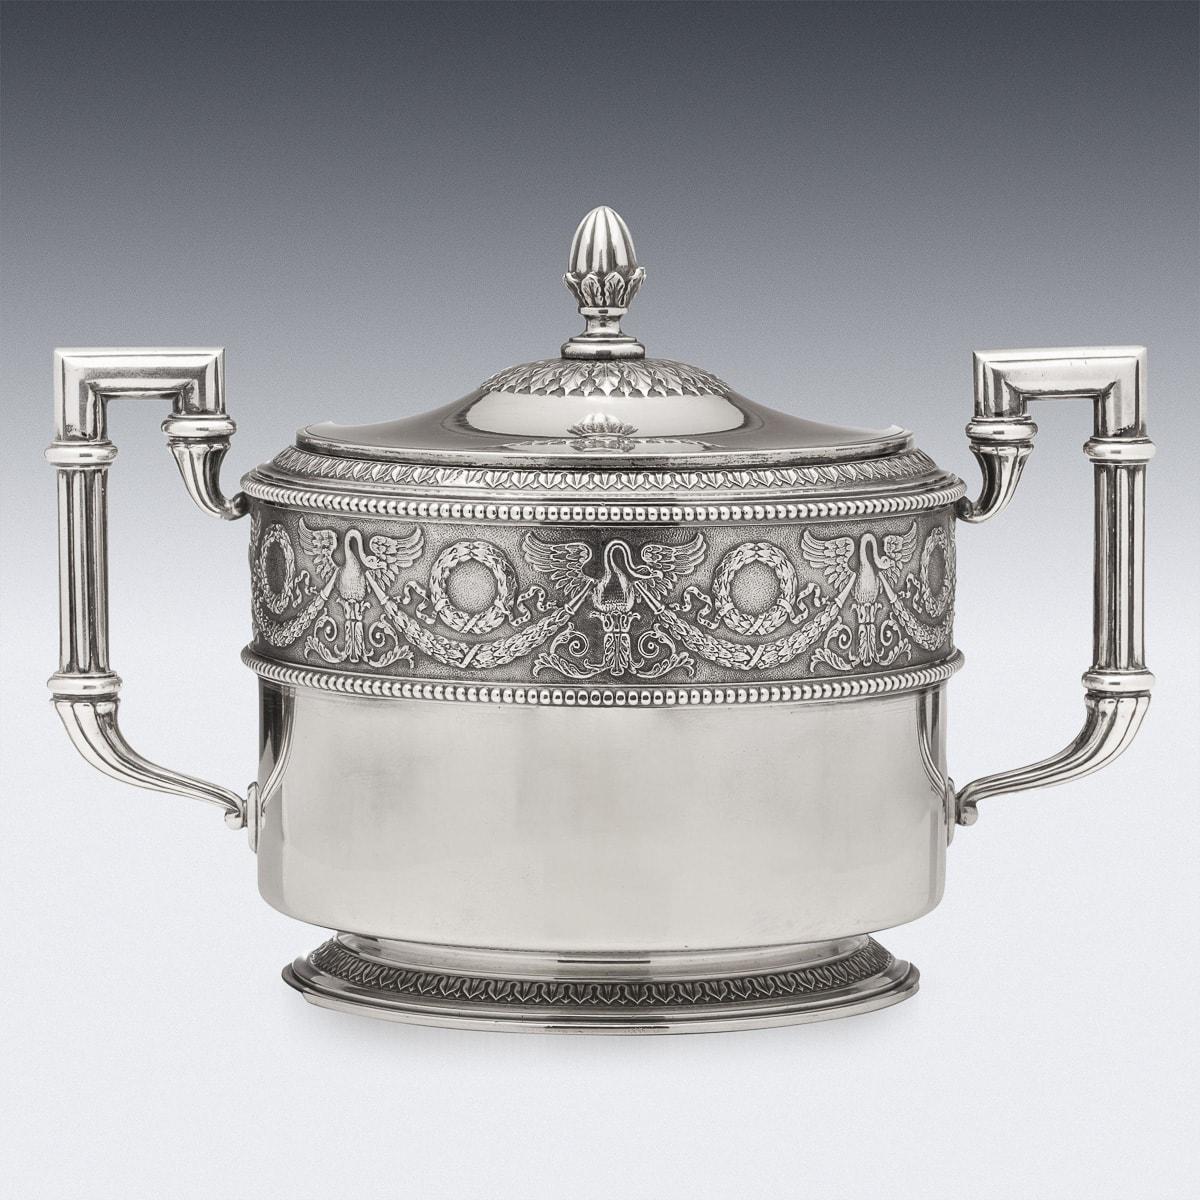 Antique early-20th Century Russian Faberge solid silver lidded sugar bowl made in Imperial style, decorated with swans, garlannds, wreaths, acanthus leaf and beaded boarders. Hallmarked silver 84 (875 standard), Moscow, c.1900, Faberge retail mark